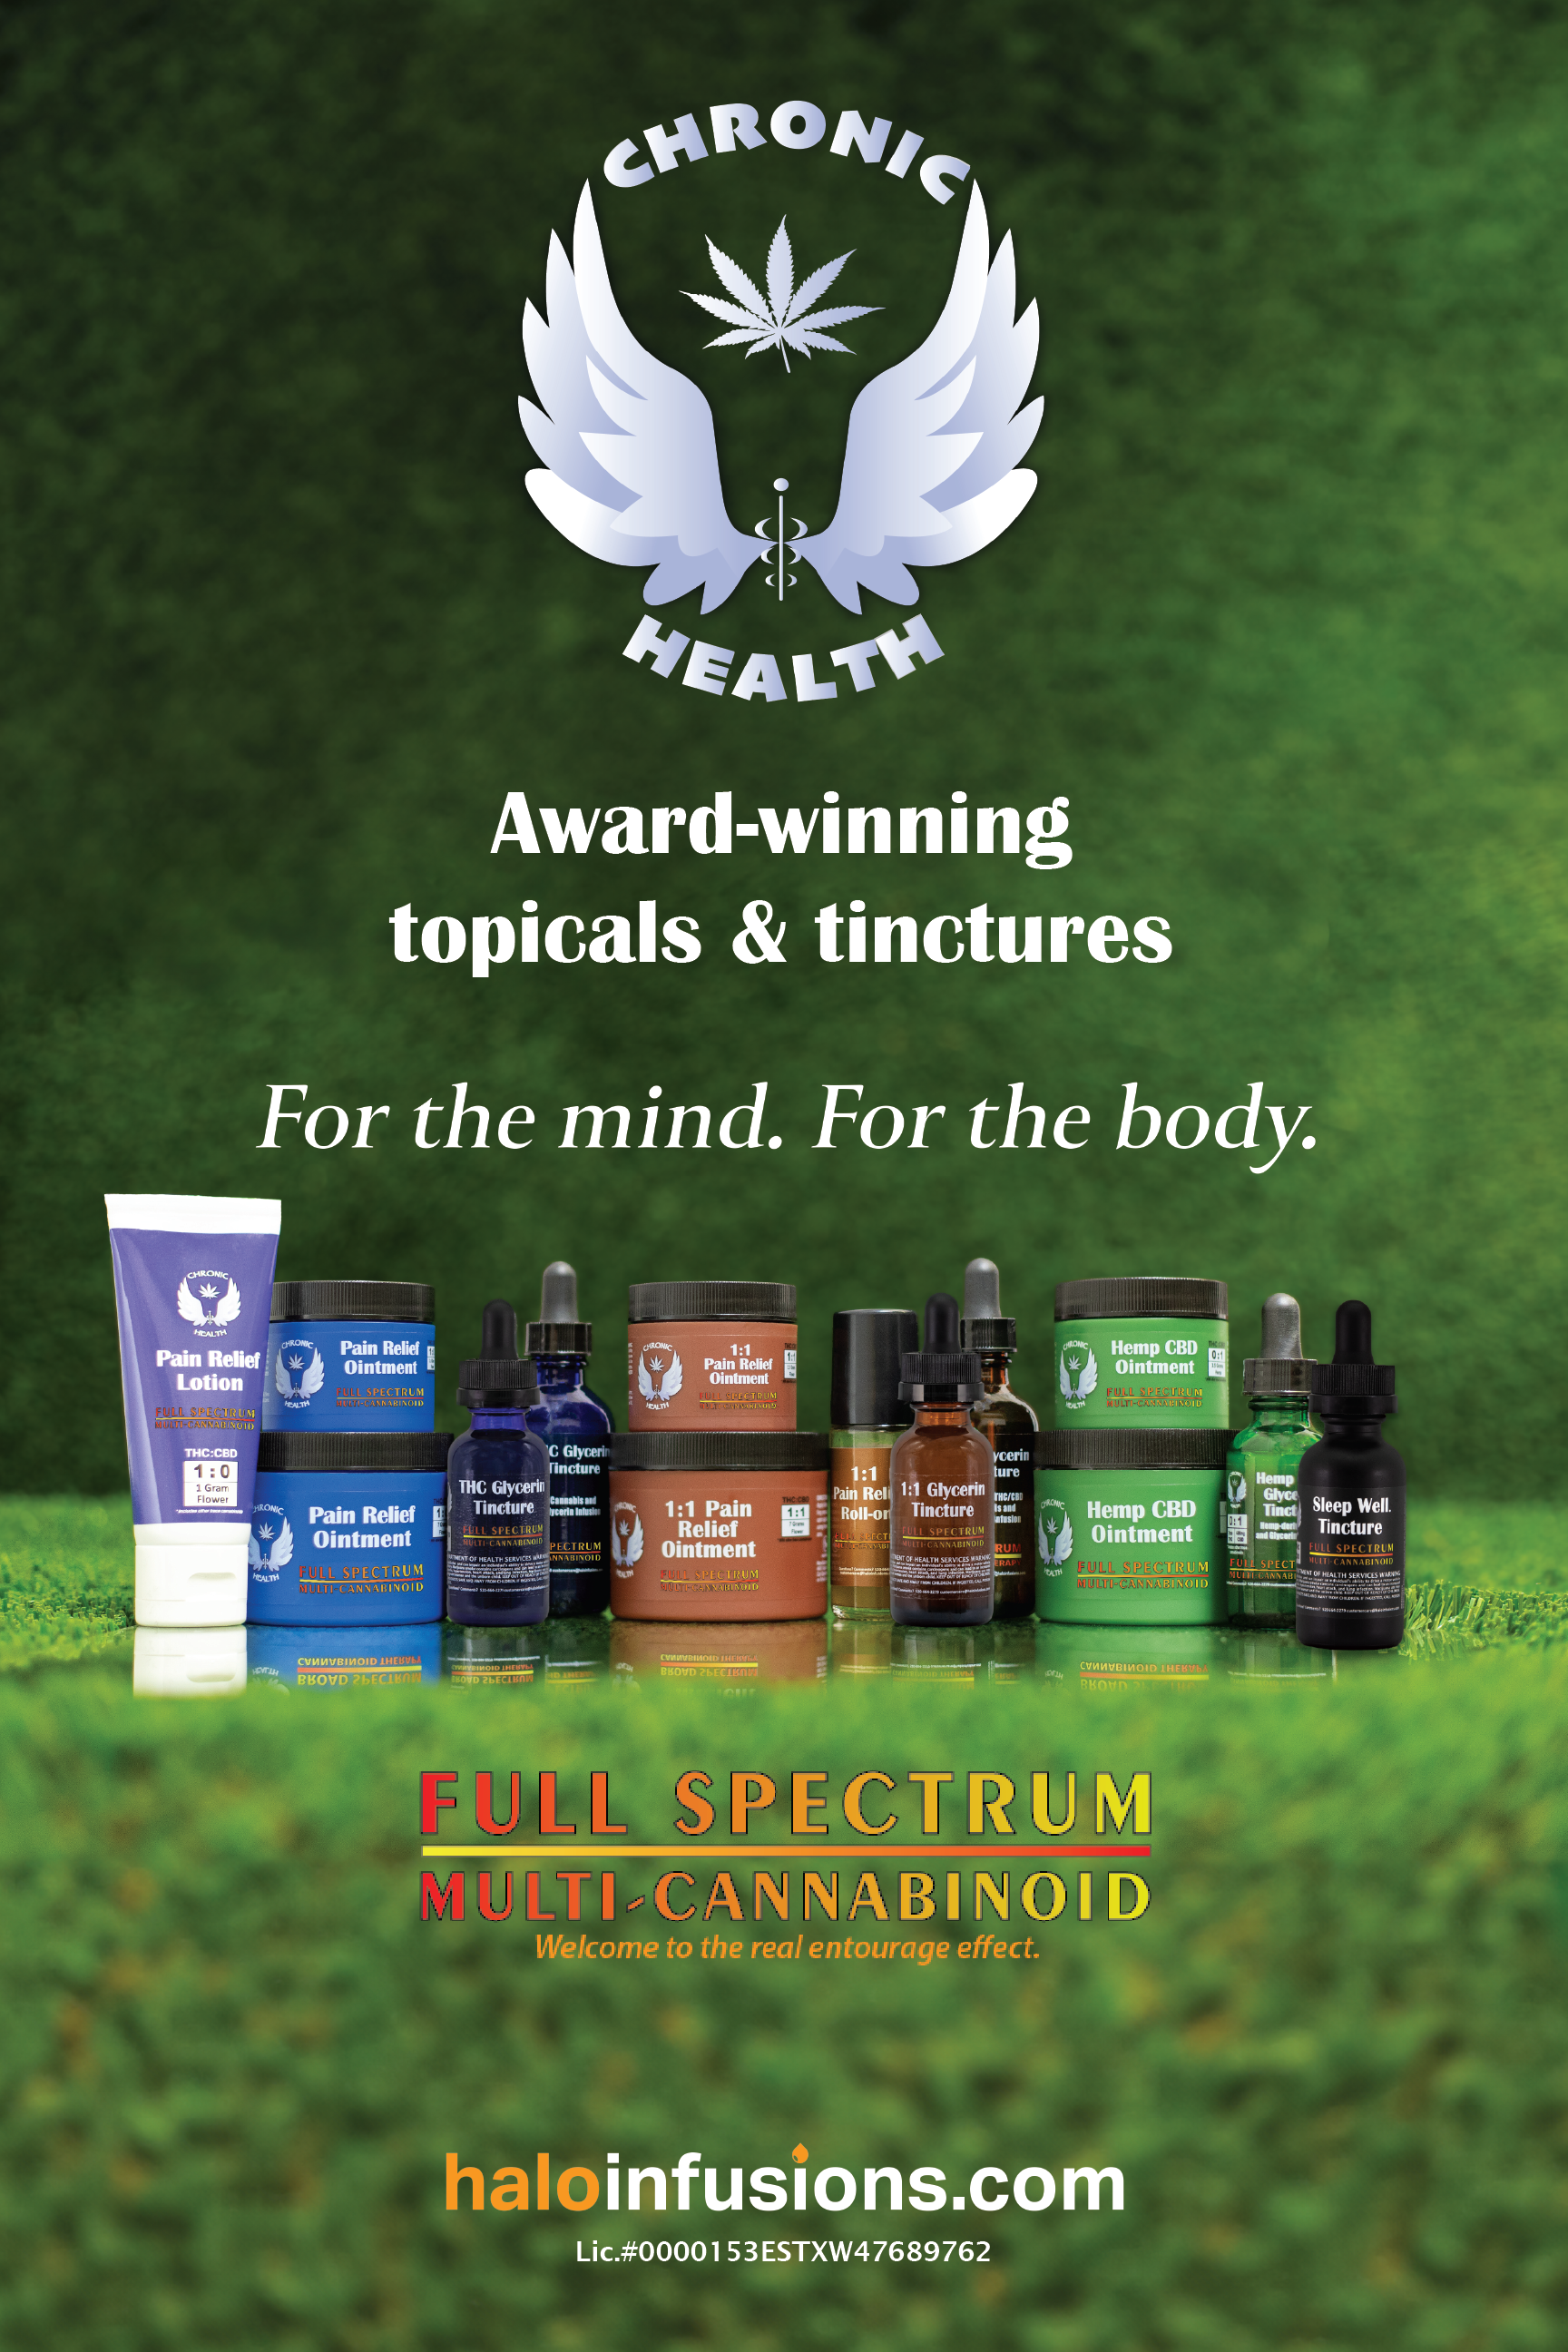 Chronic Health Poster - Halo Infusions. full spectrum. display options. merchandising